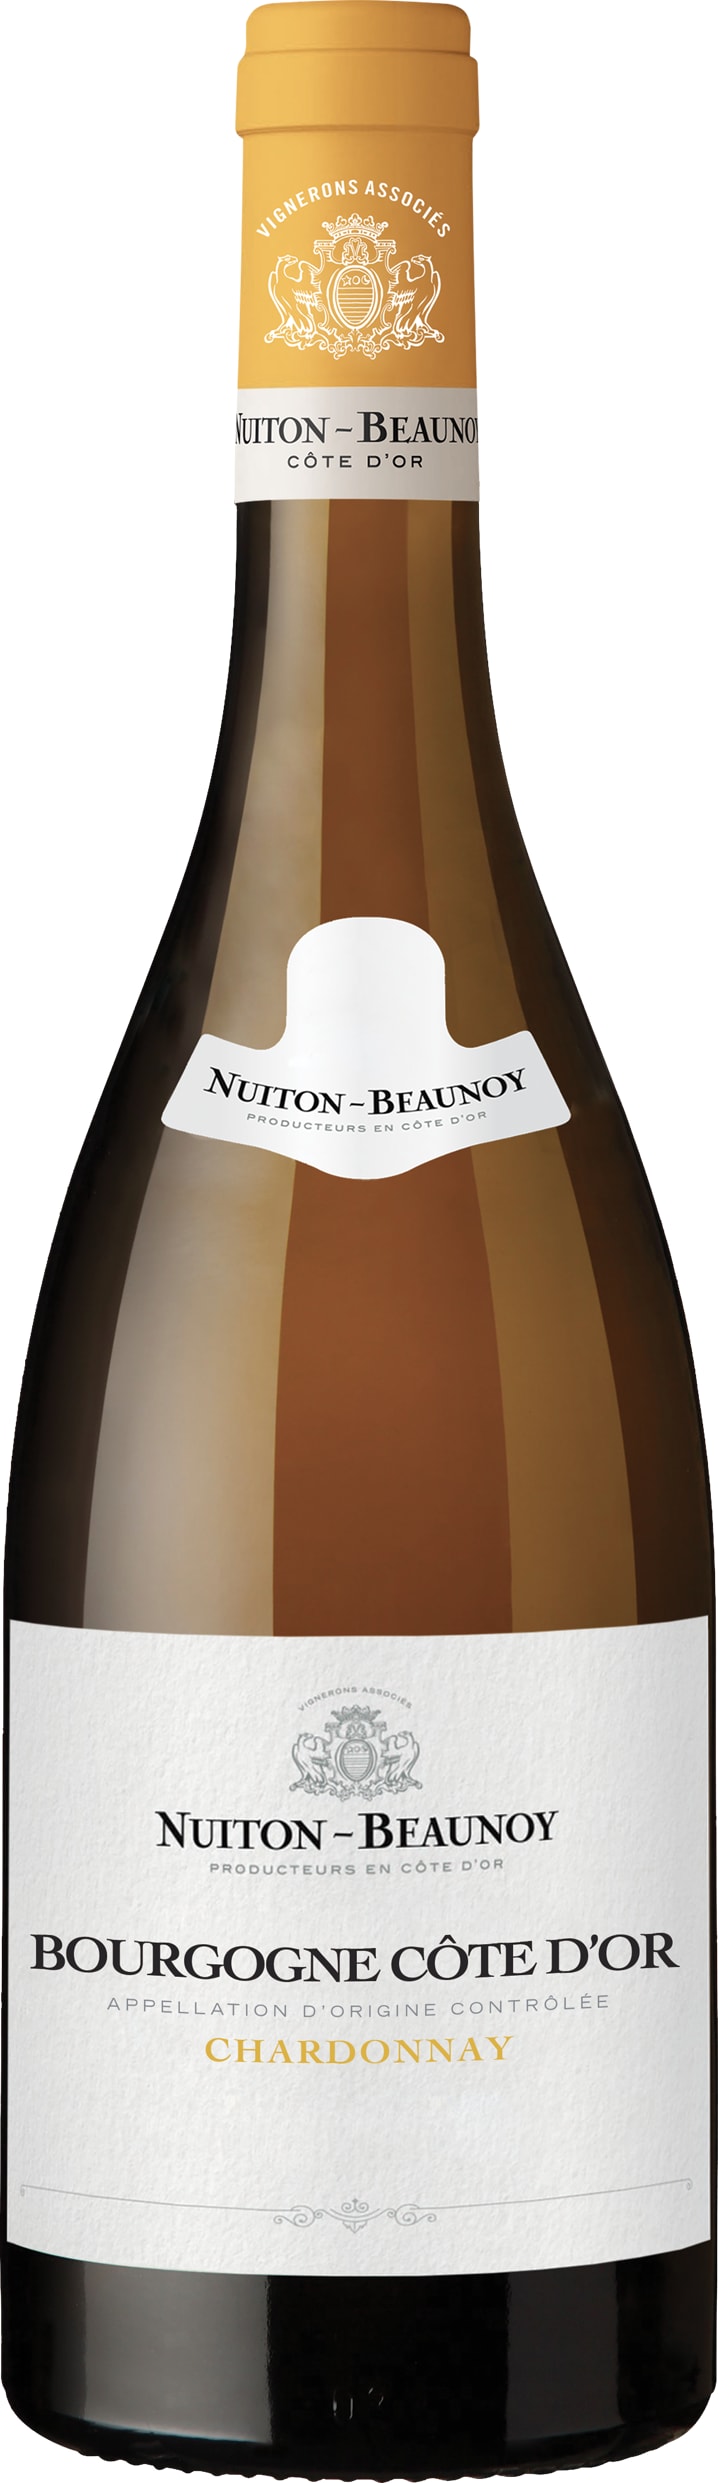 Nuiton-Beaunoy Bourgogne Cote d'Or Chardonnay 2018 75cl - Buy Nuiton-Beaunoy Wines from GREAT WINES DIRECT wine shop